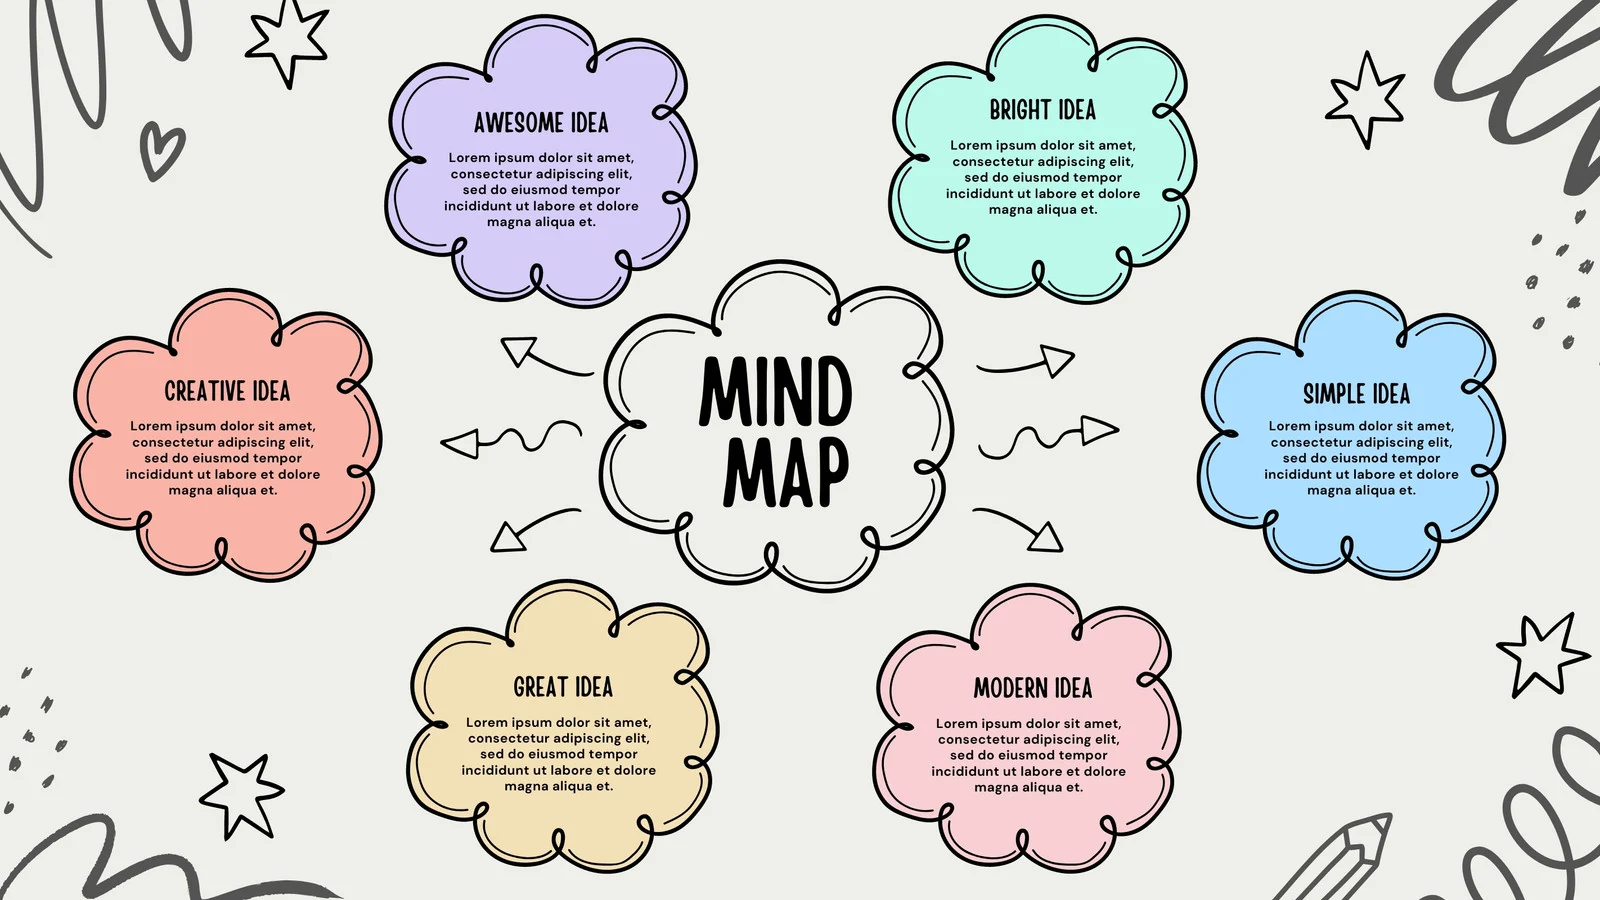 How are Mind Maps Different From Outlines